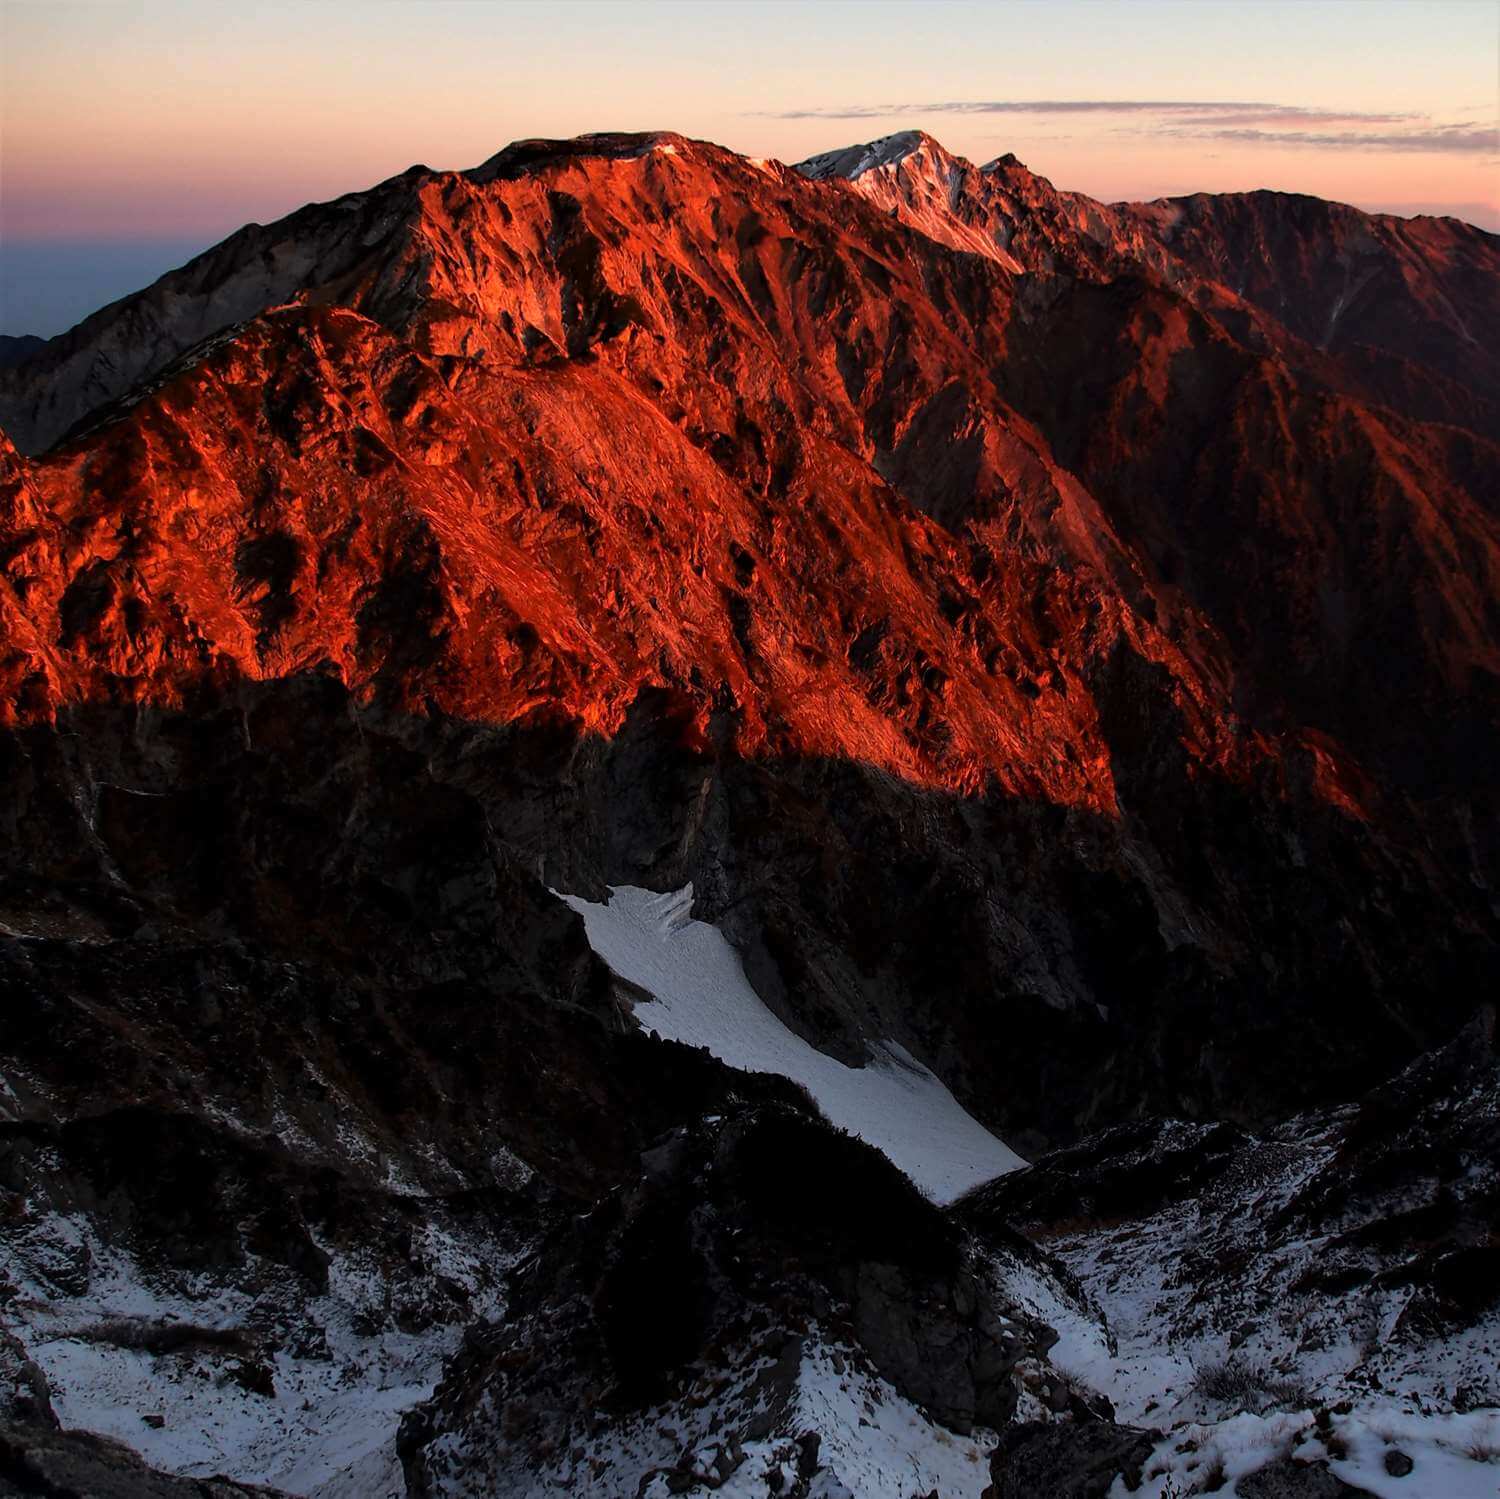 In the central part of Honshu, there is a mountainous area called "Japan Alps" with an altitude of 3000m 9